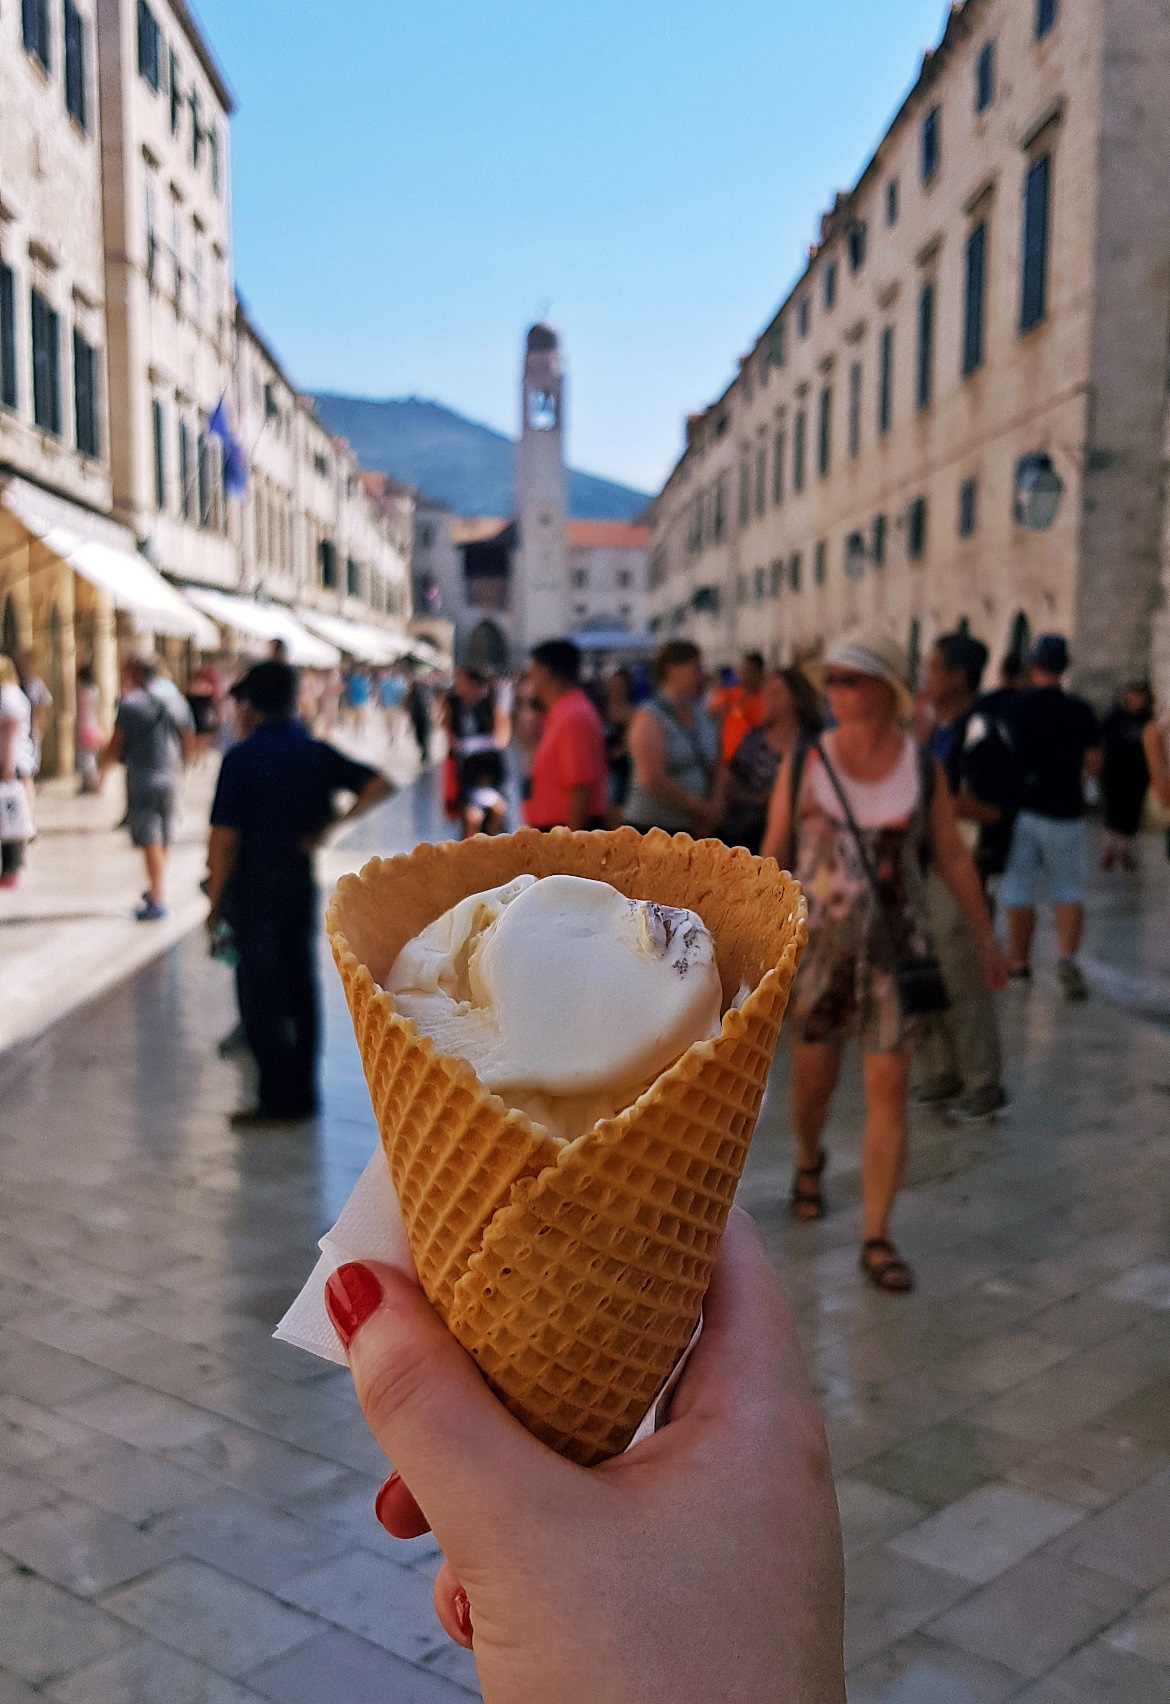 La Dolce Vita ice cream on the Stradun - Sightseeing in Dubrovnik, Croatia - Top Travel Tips by BeckyBecky Blogs